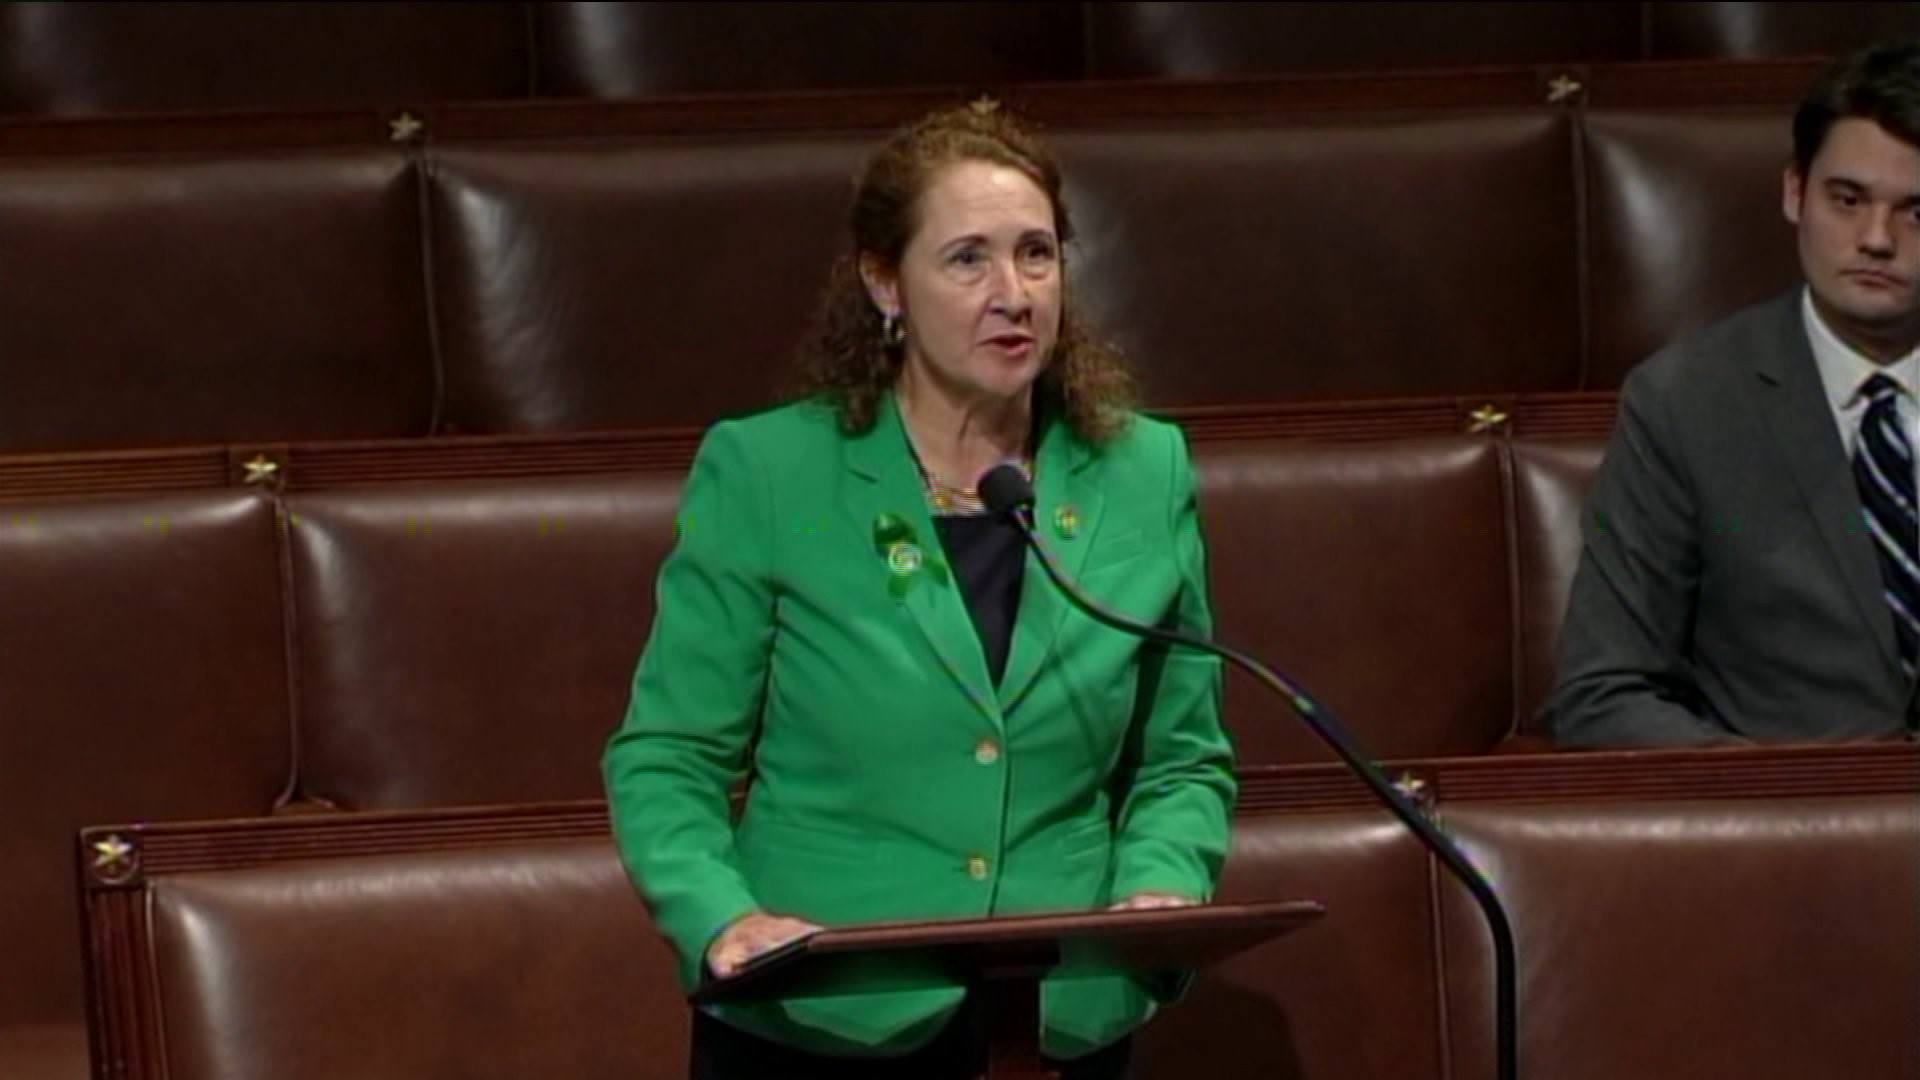 Congresswoman Esty says sorry for not protecting female employees